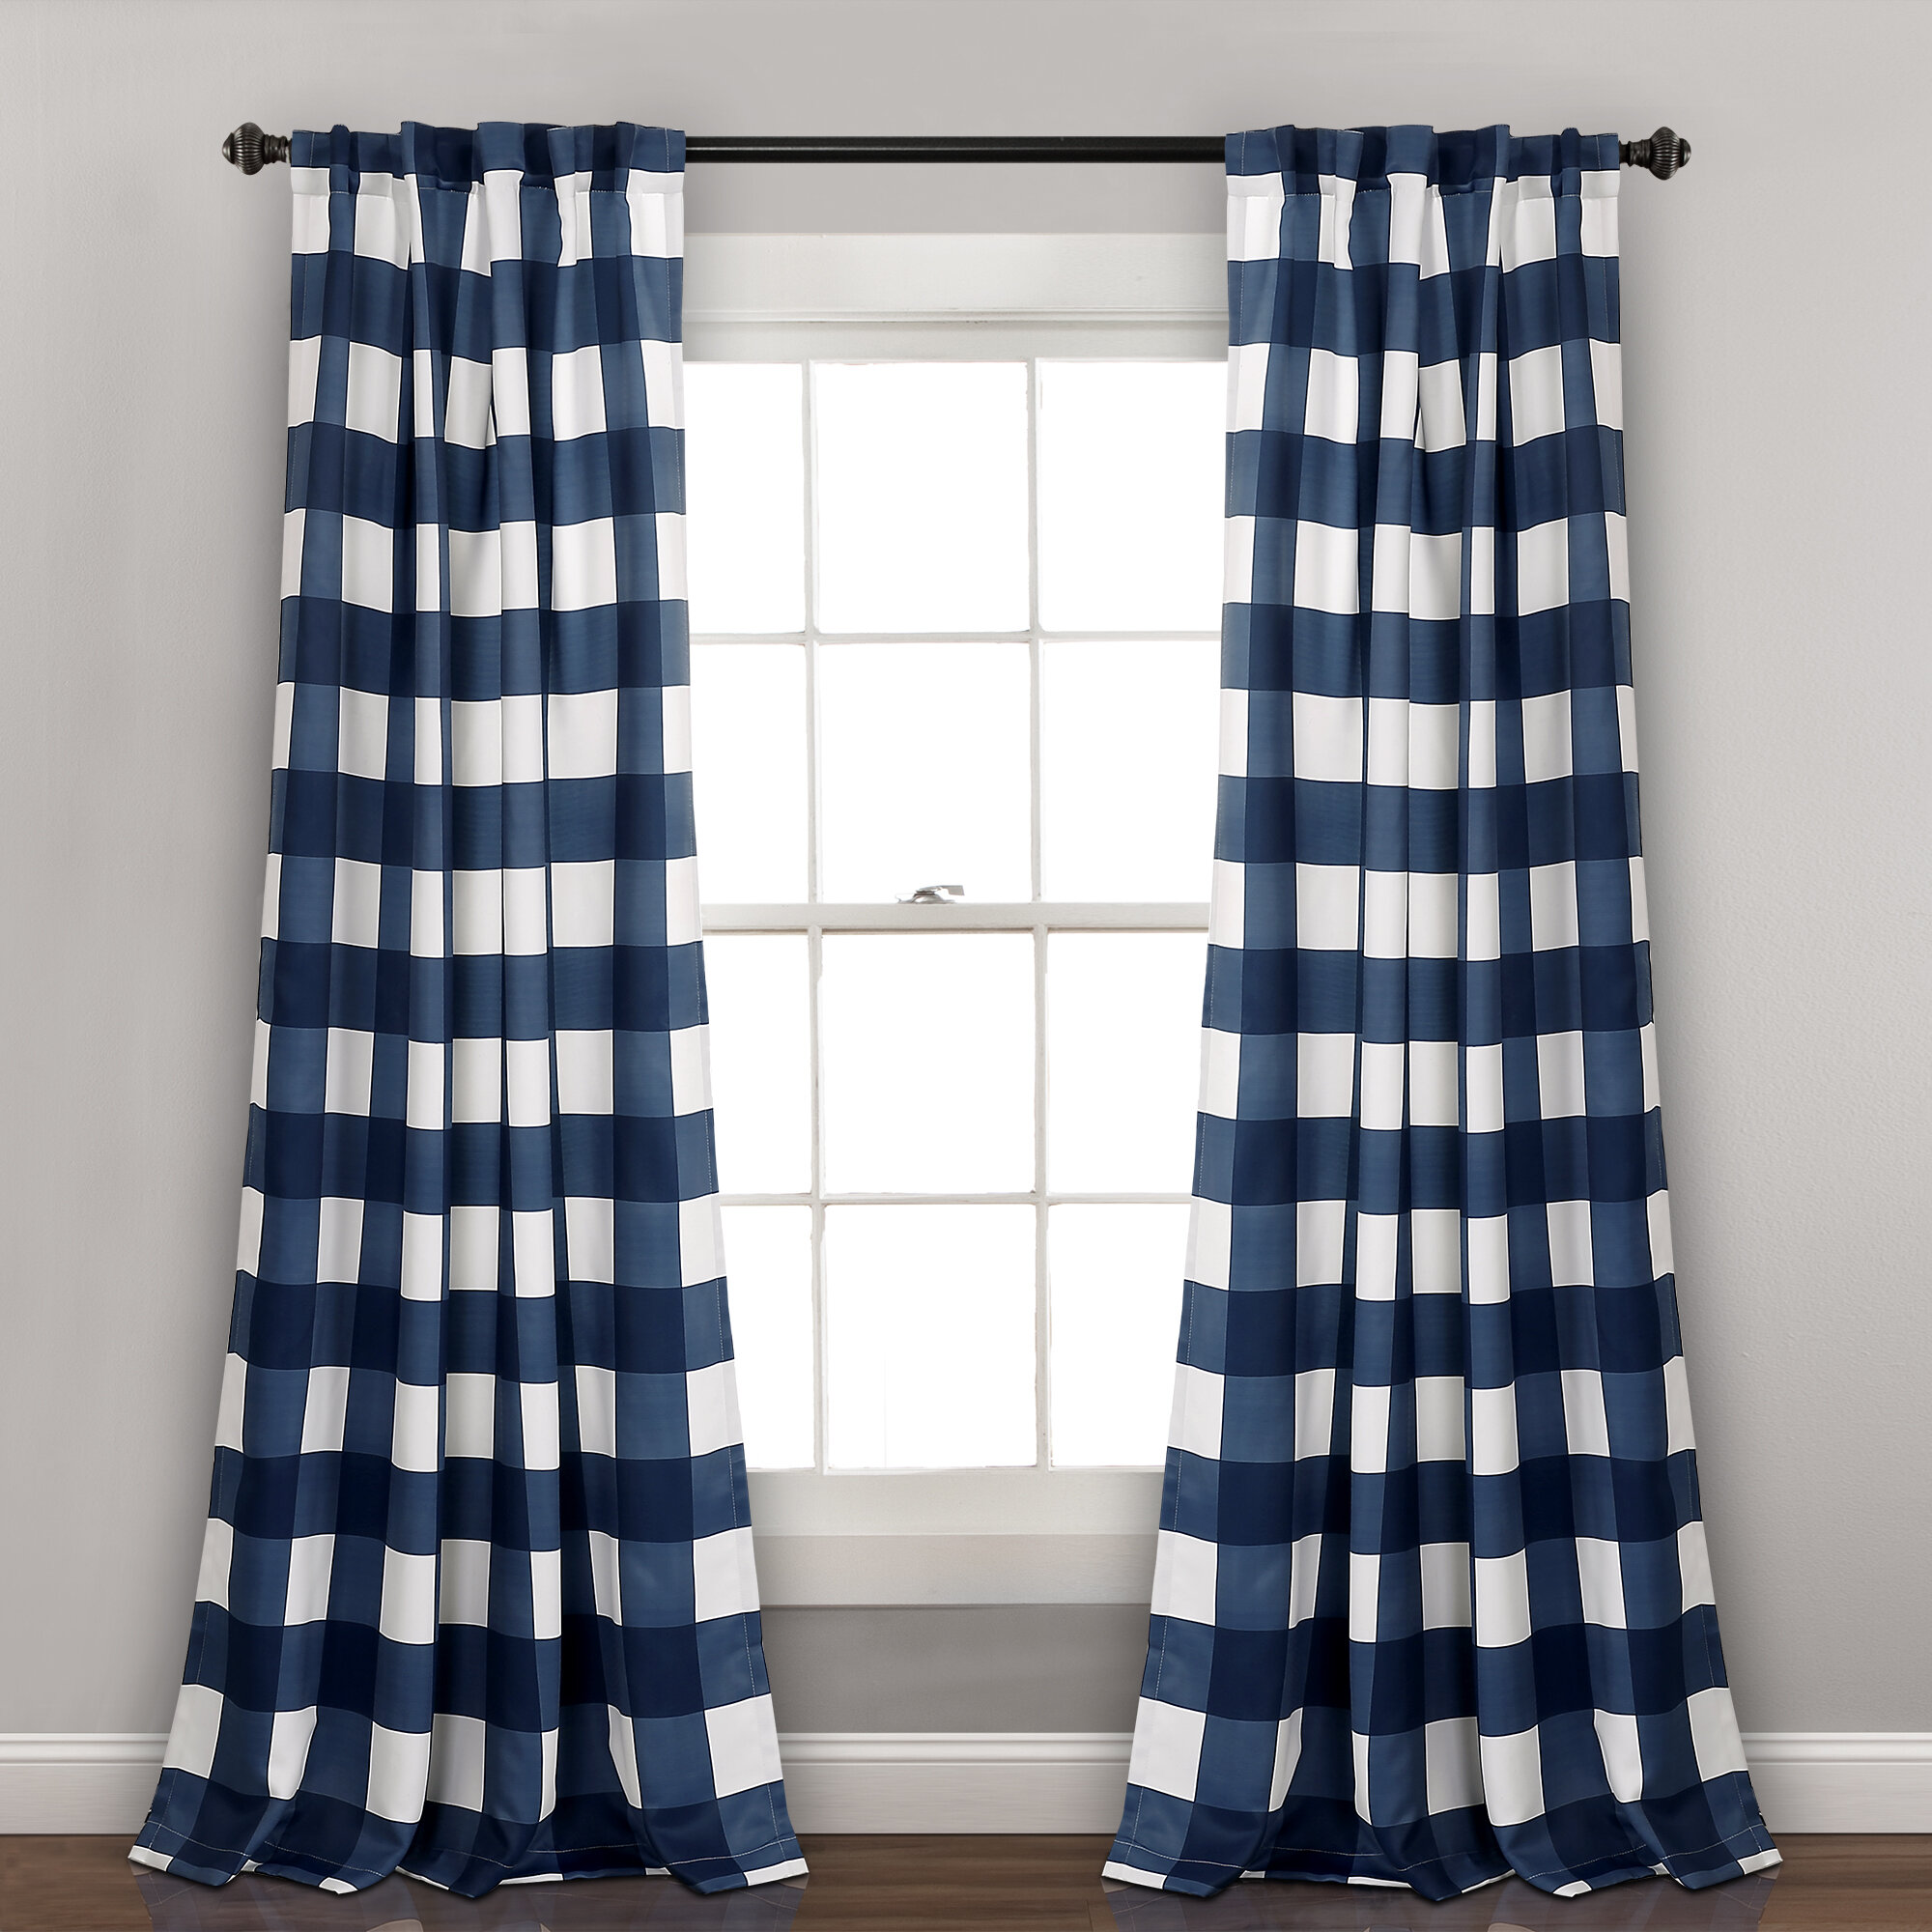 Set 2 Red Blue Plaid Patchwork Window Curtains Panels Drapes Pair 84 in Grommet